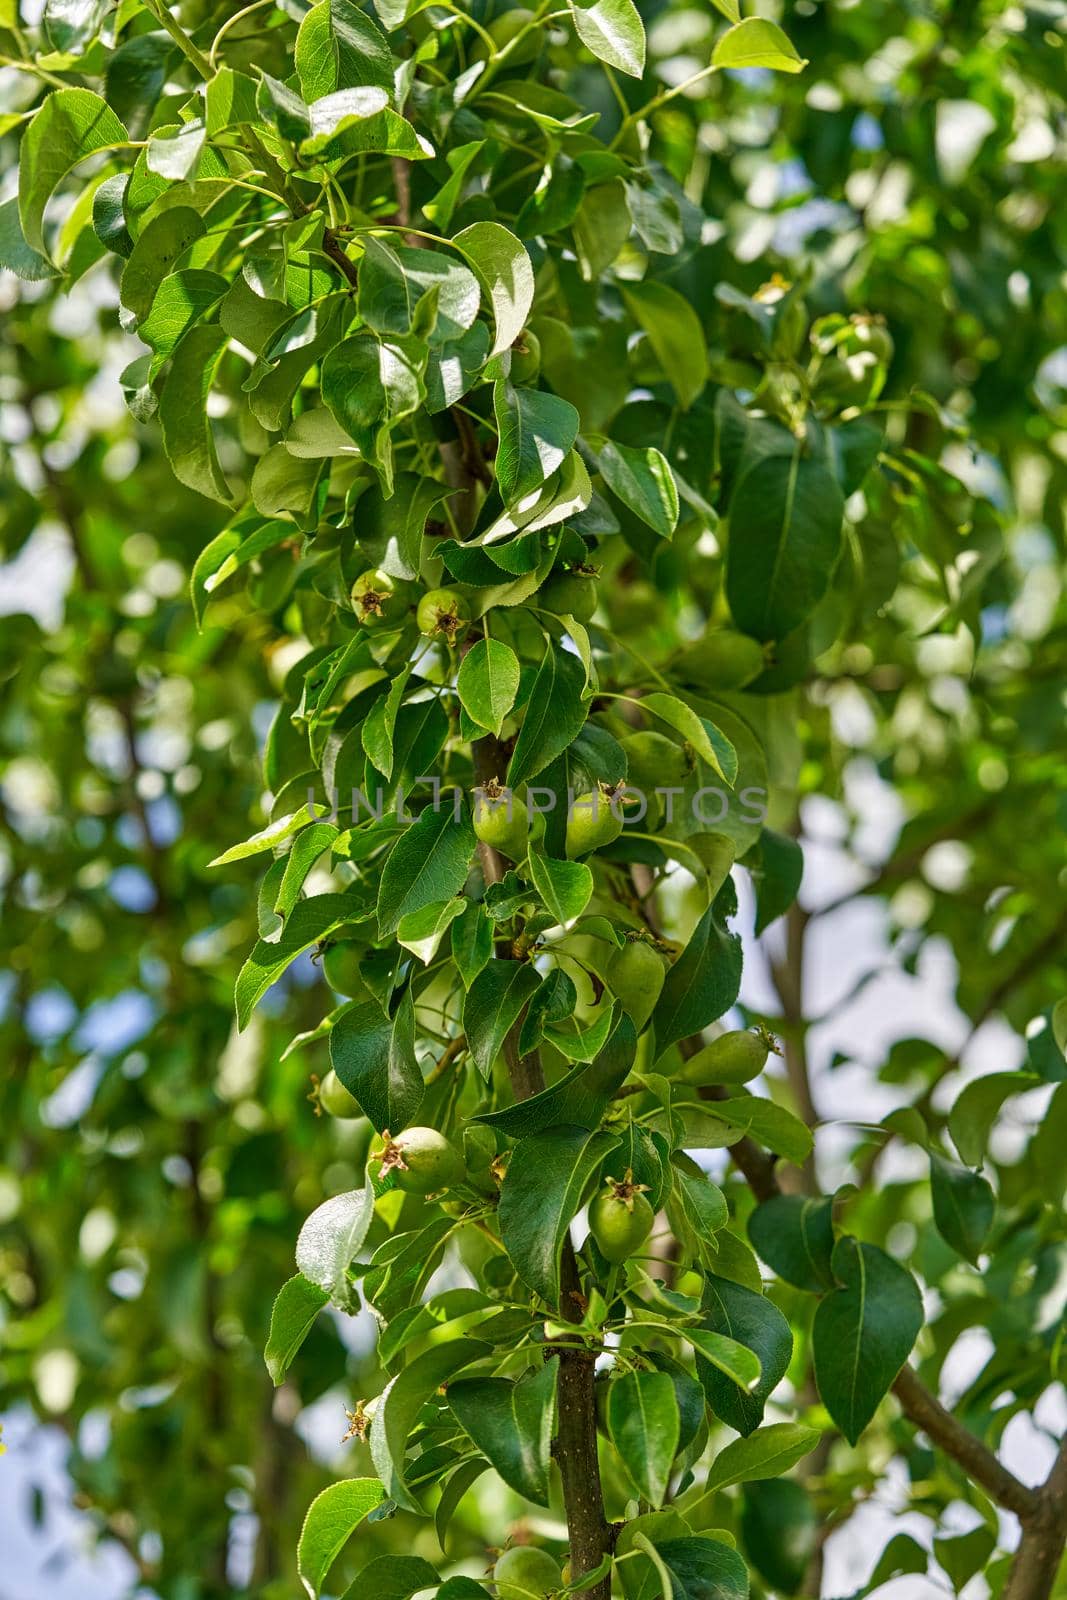 Unripe green pear on tree branches, Pear tree, Delicious young pear hanging on the tree, Summer orchard